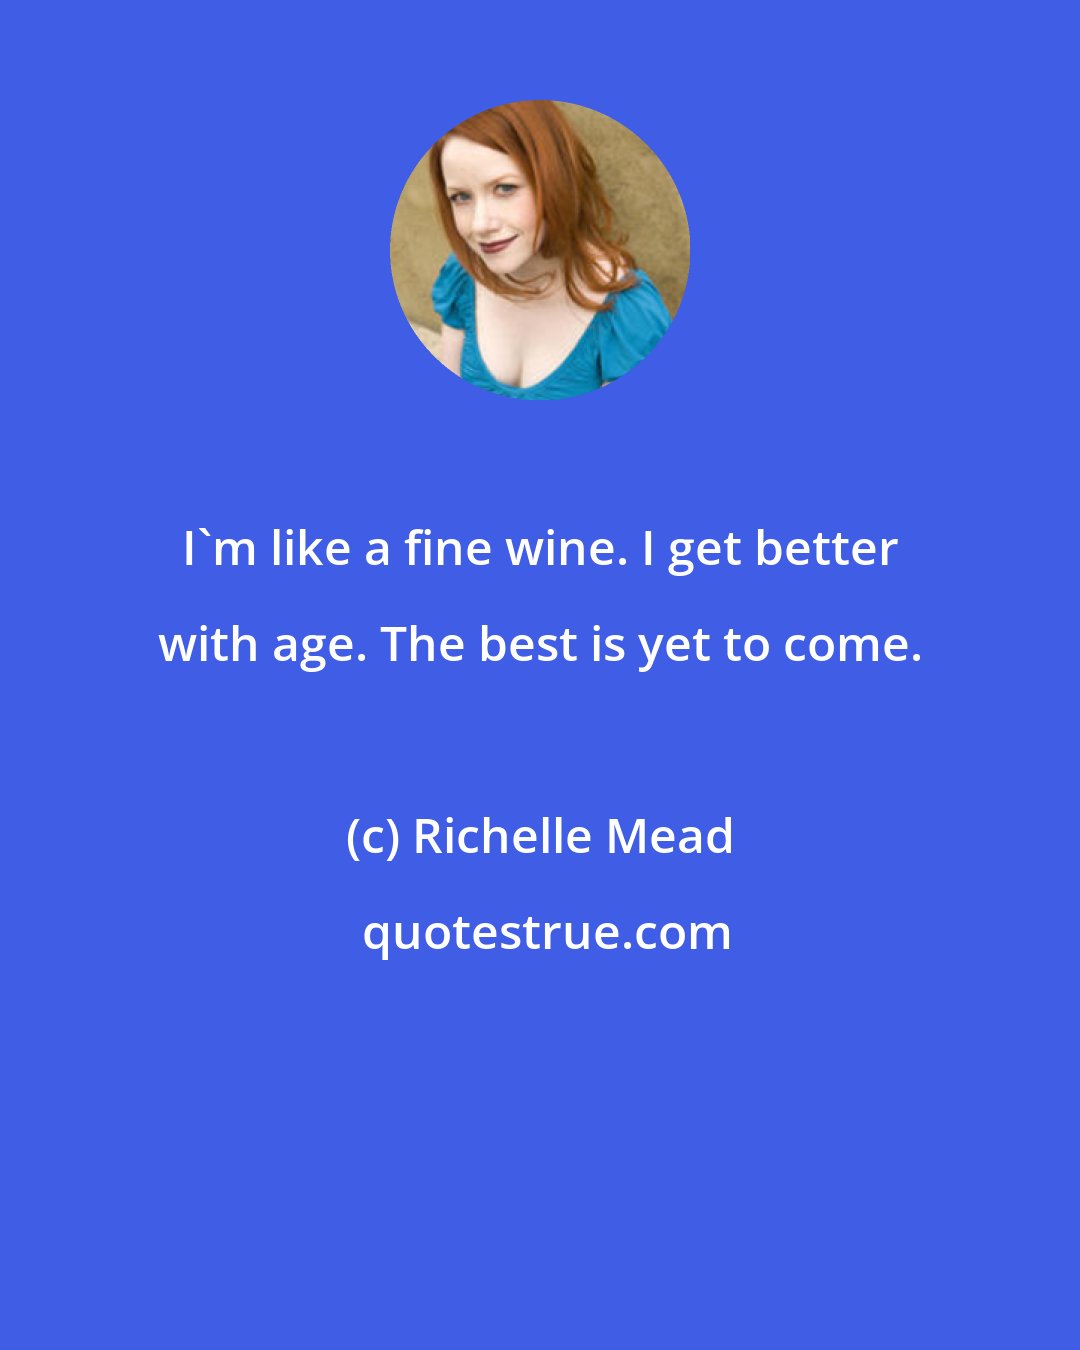 Richelle Mead: I'm like a fine wine. I get better with age. The best is yet to come.